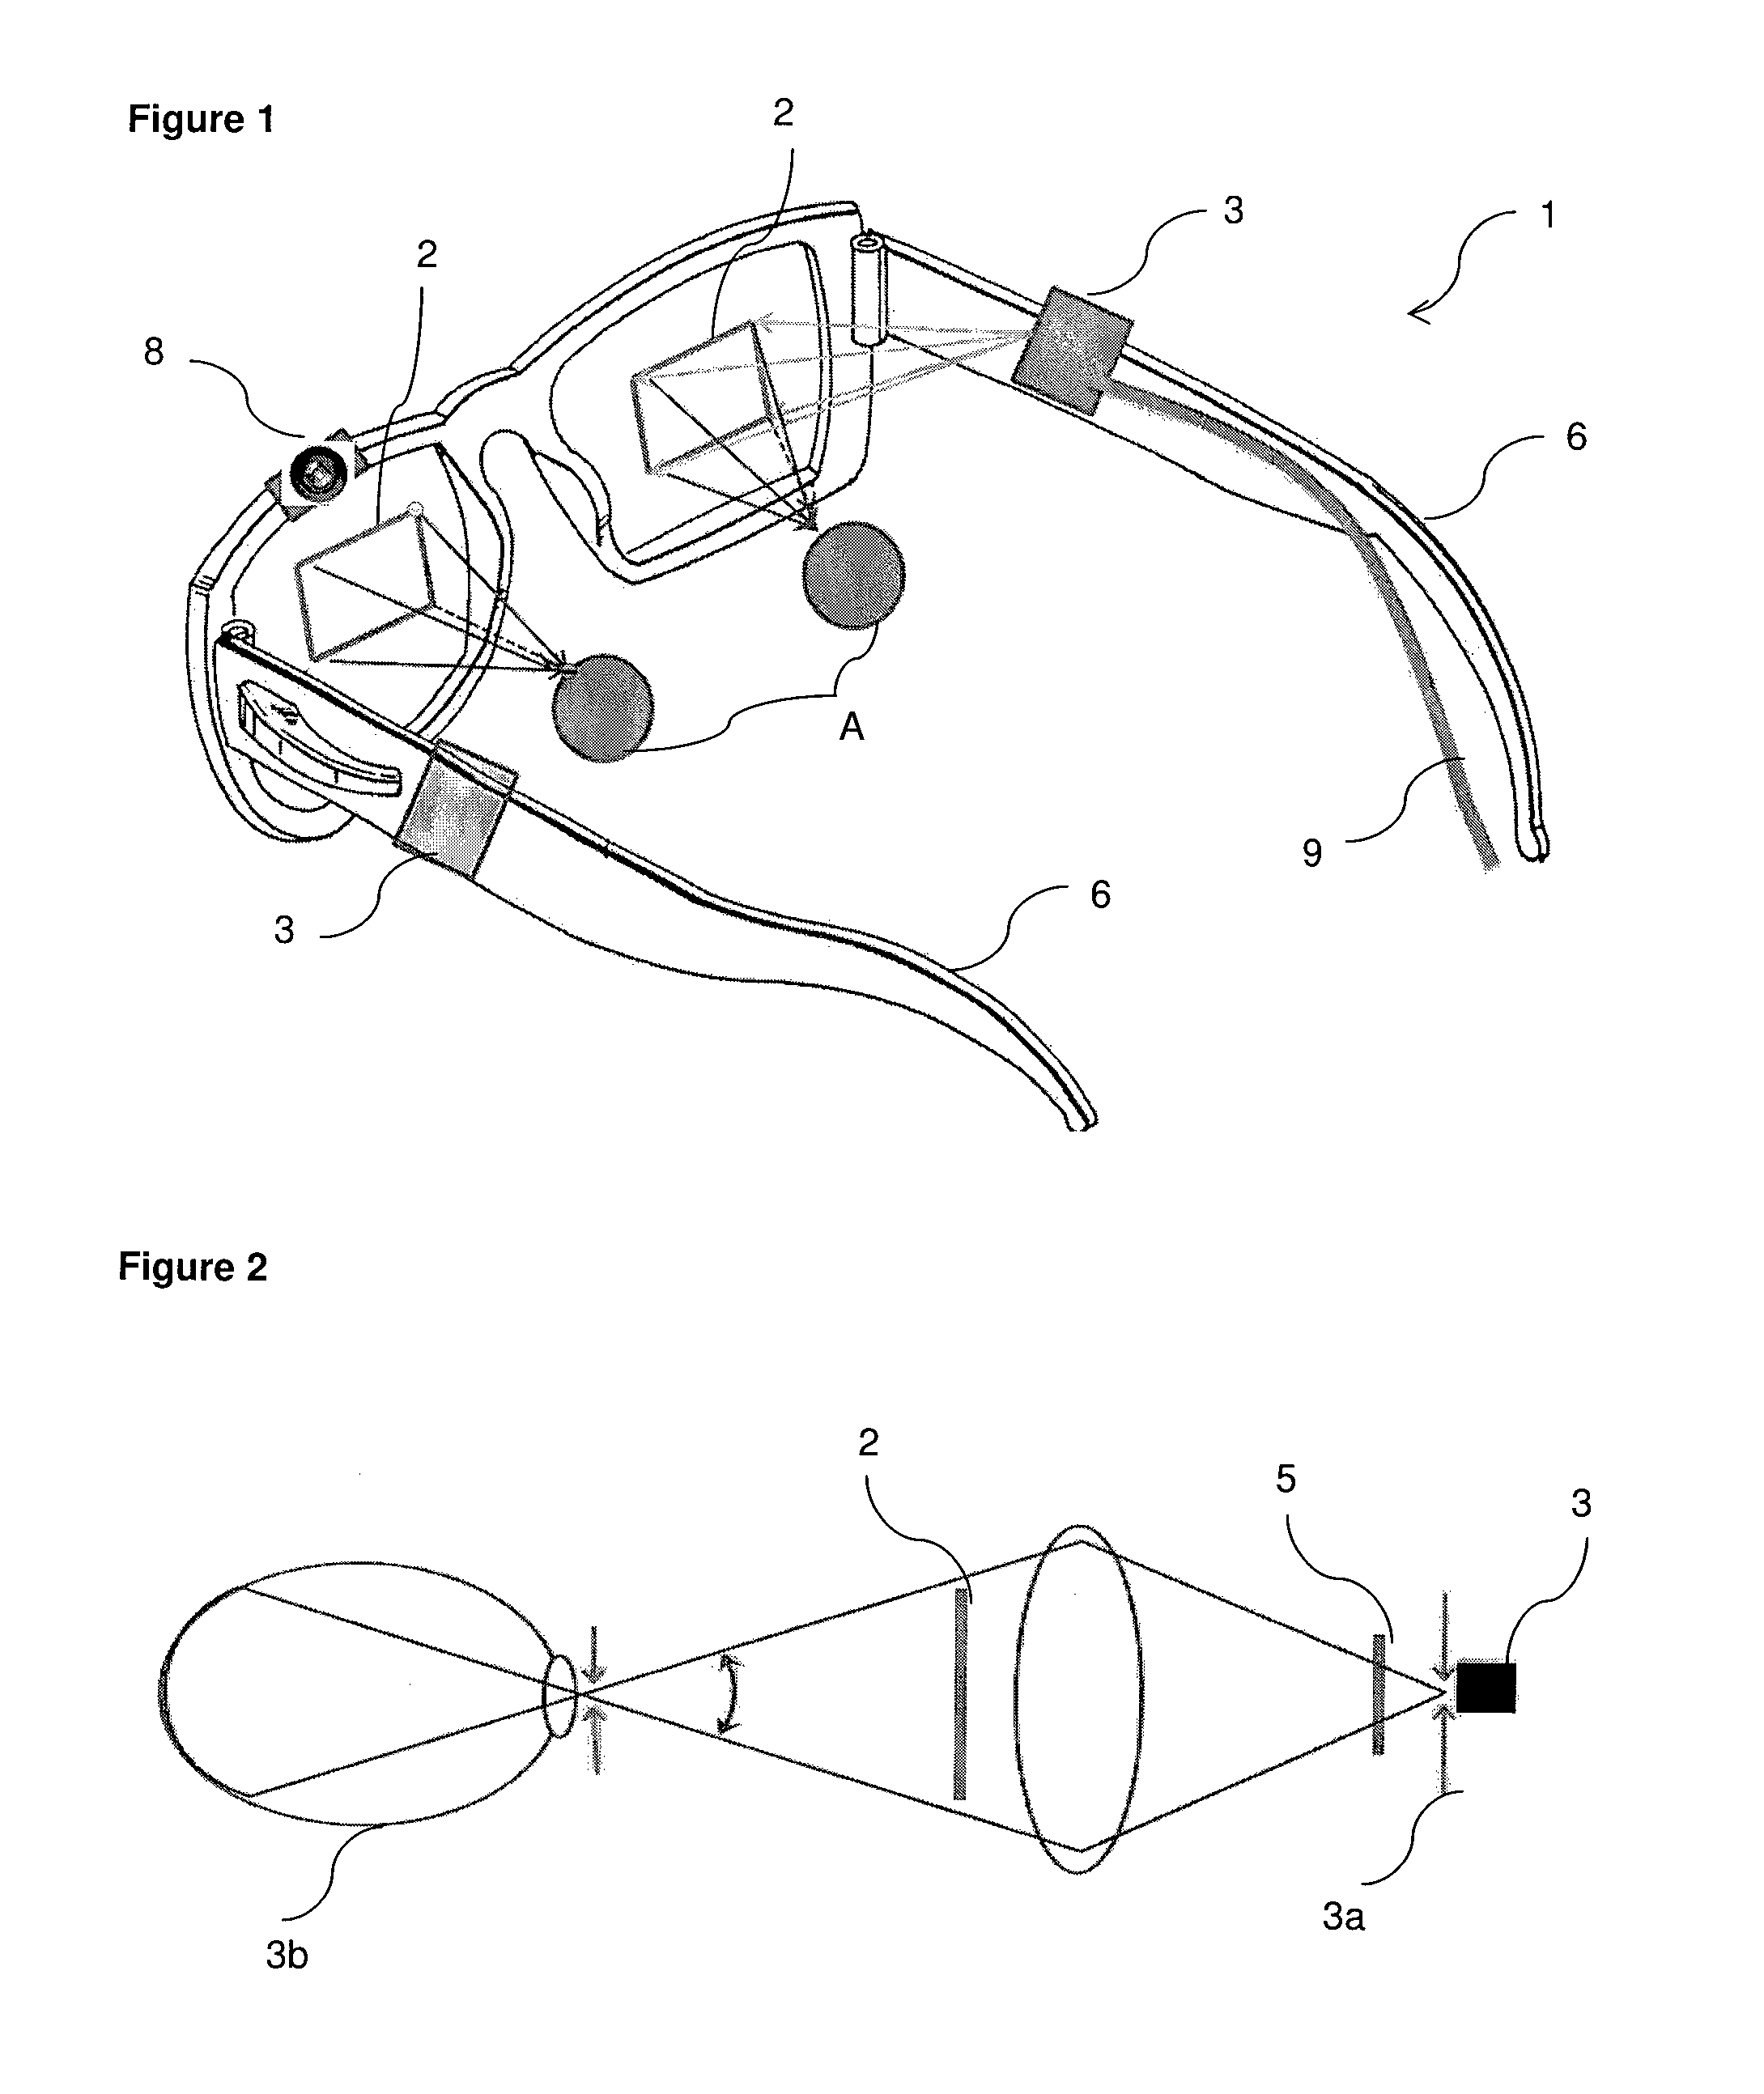 Image display device in the form of a pair of eye glasses comprising micro reflectors